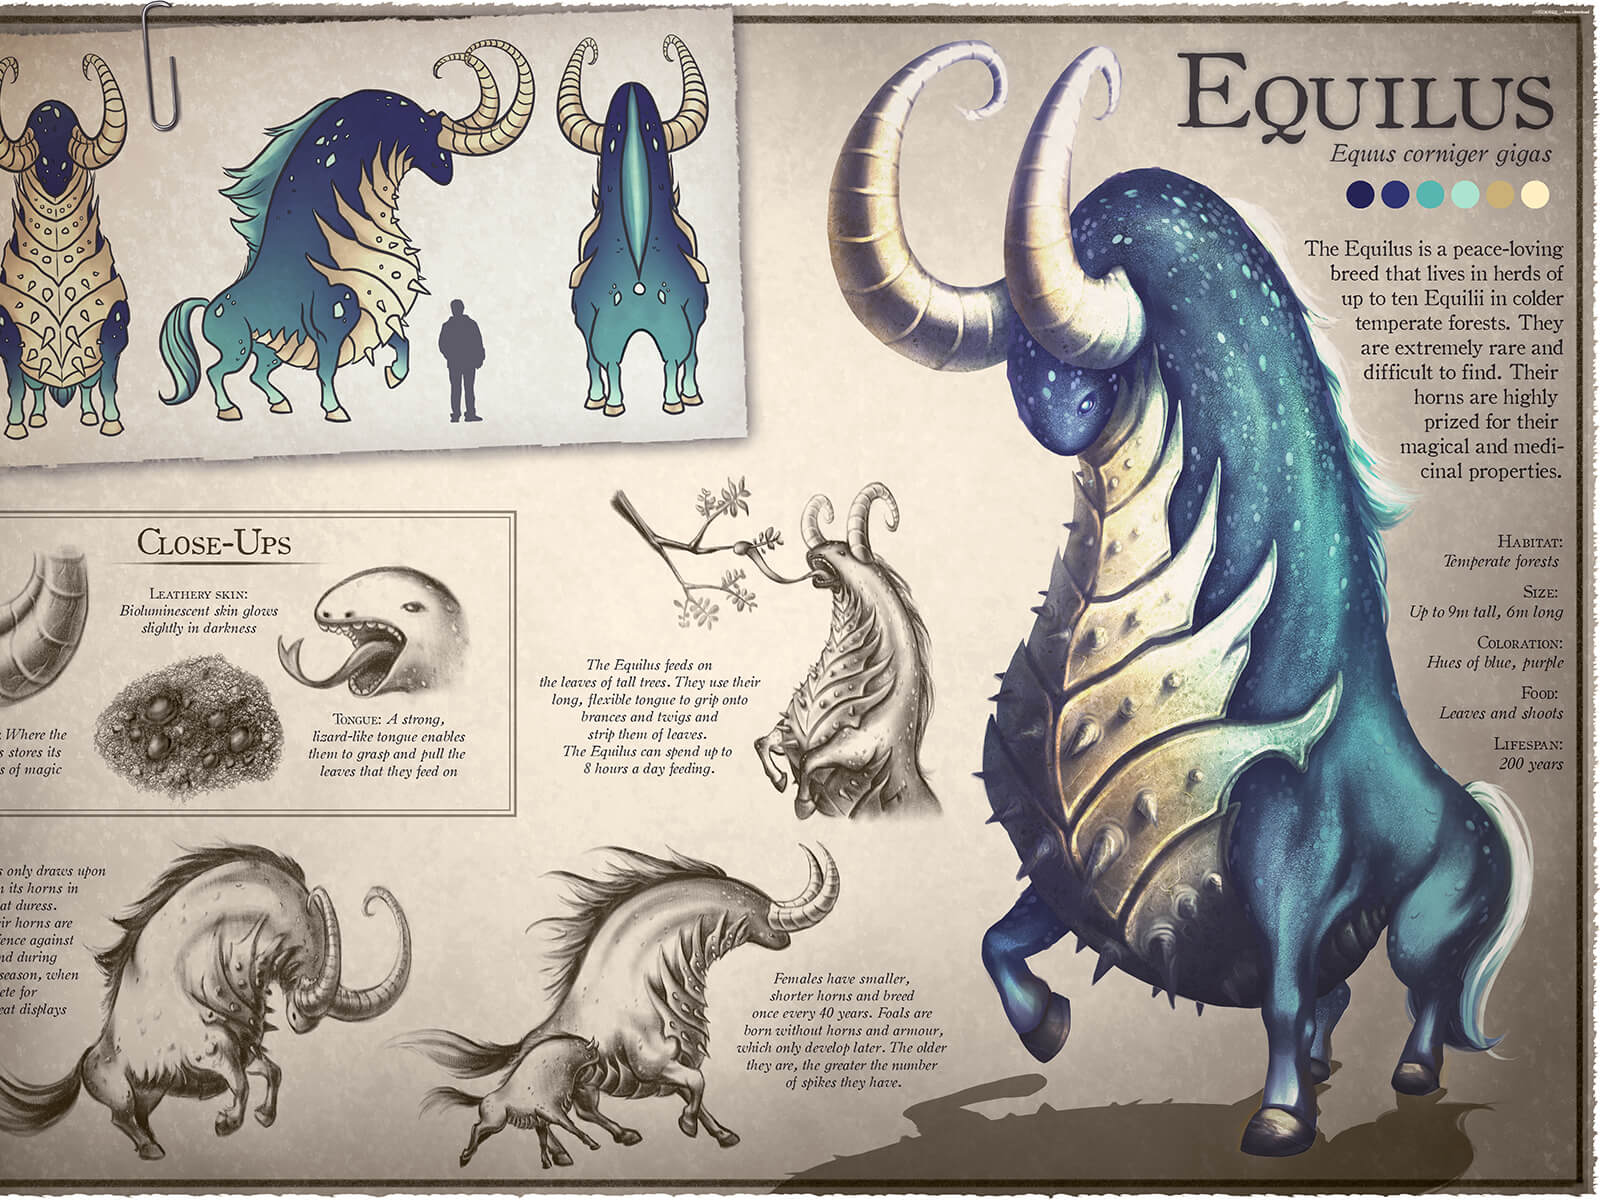 Concept art of a blue beast with the torso of a horse, the horns of a ram, and the head and chest of a dragon-like creature.